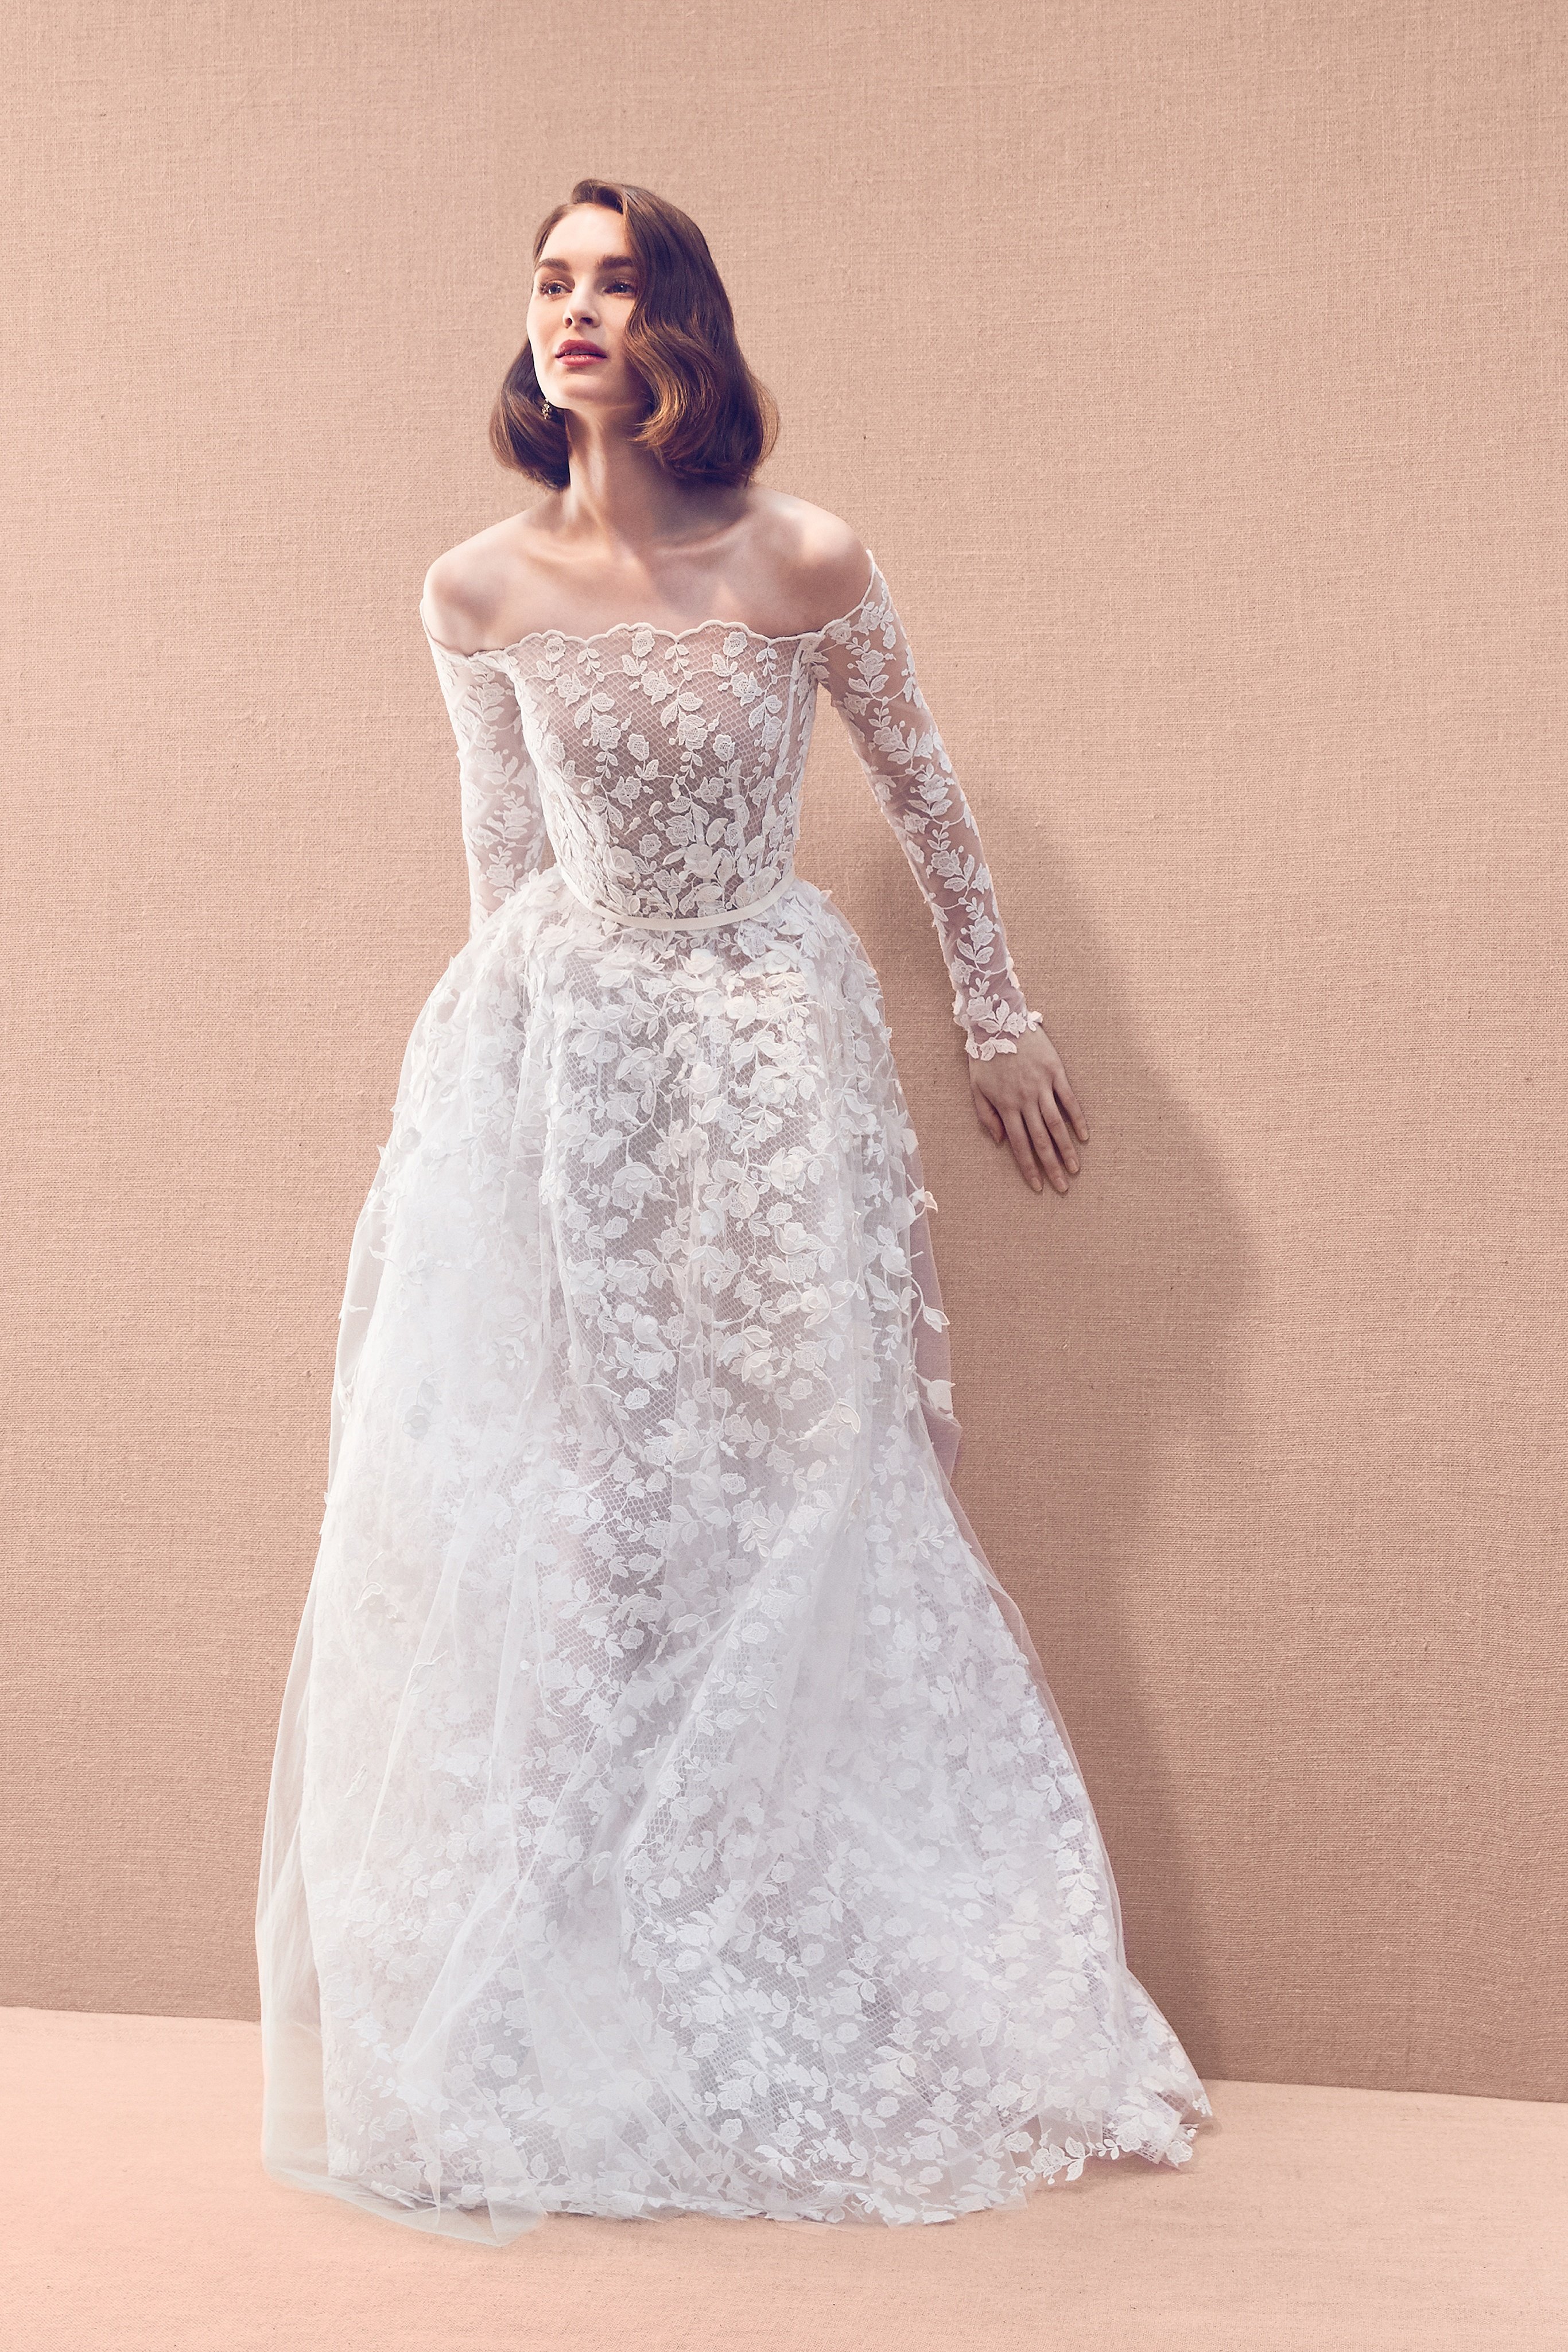 Long sleeve allover floral lace embroidered lace gown with tulle overskirt featuring organza appliqués attached on to a base of ari embroidery threadwork for a 3-D effect, totaling 80 hours of work to complete.